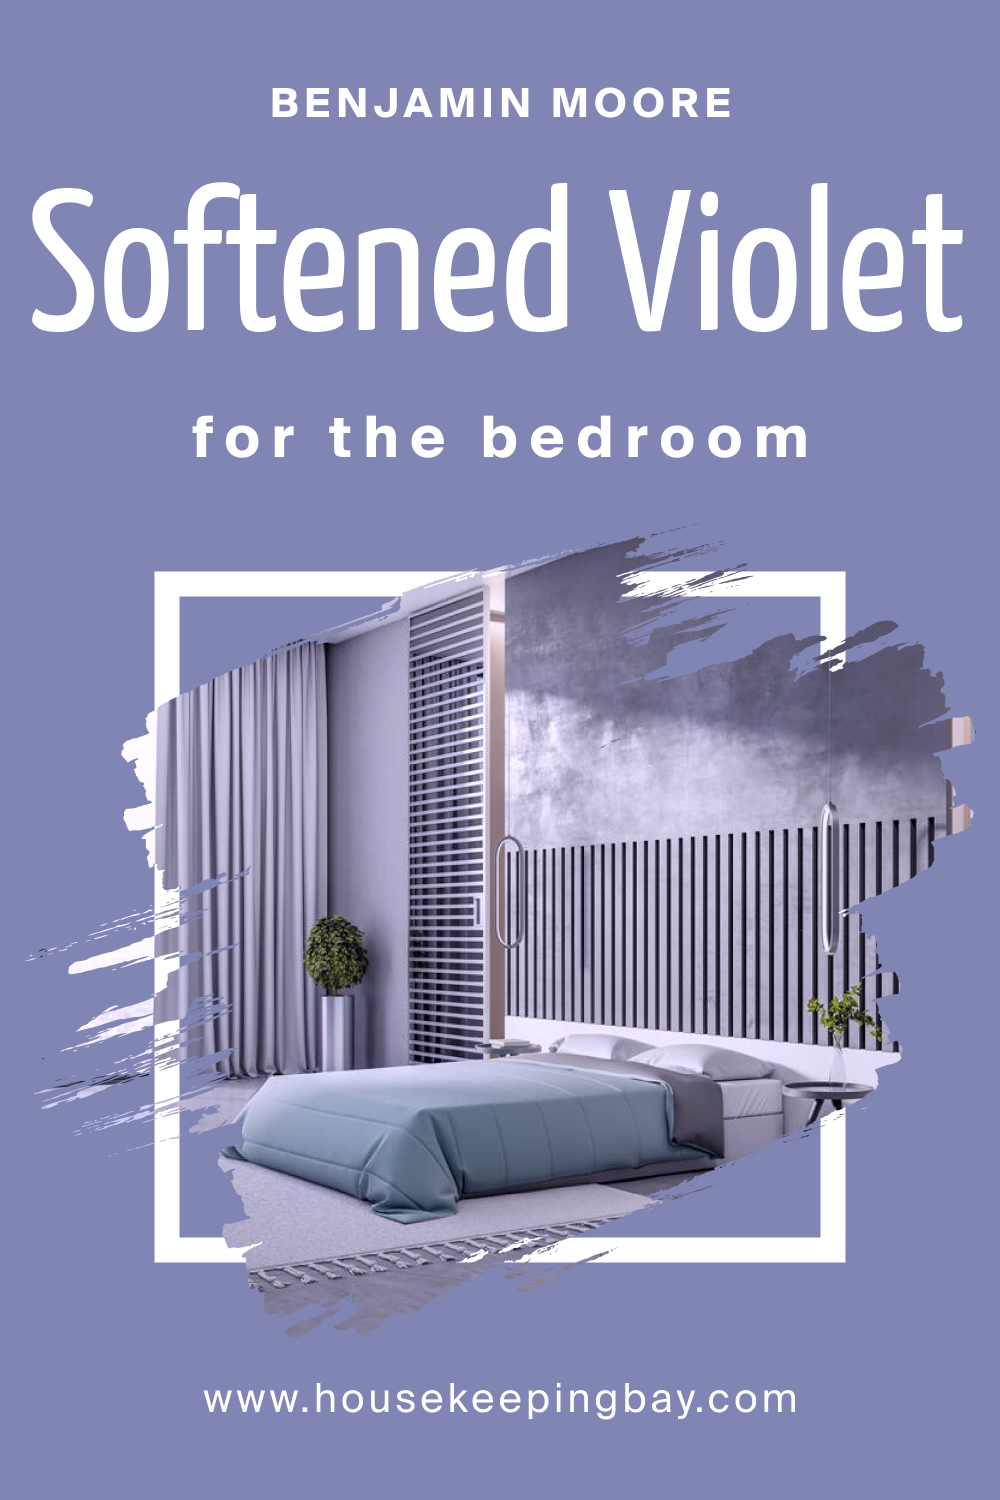 How to Use BM Softened Violet 1420 in the Bedroom?